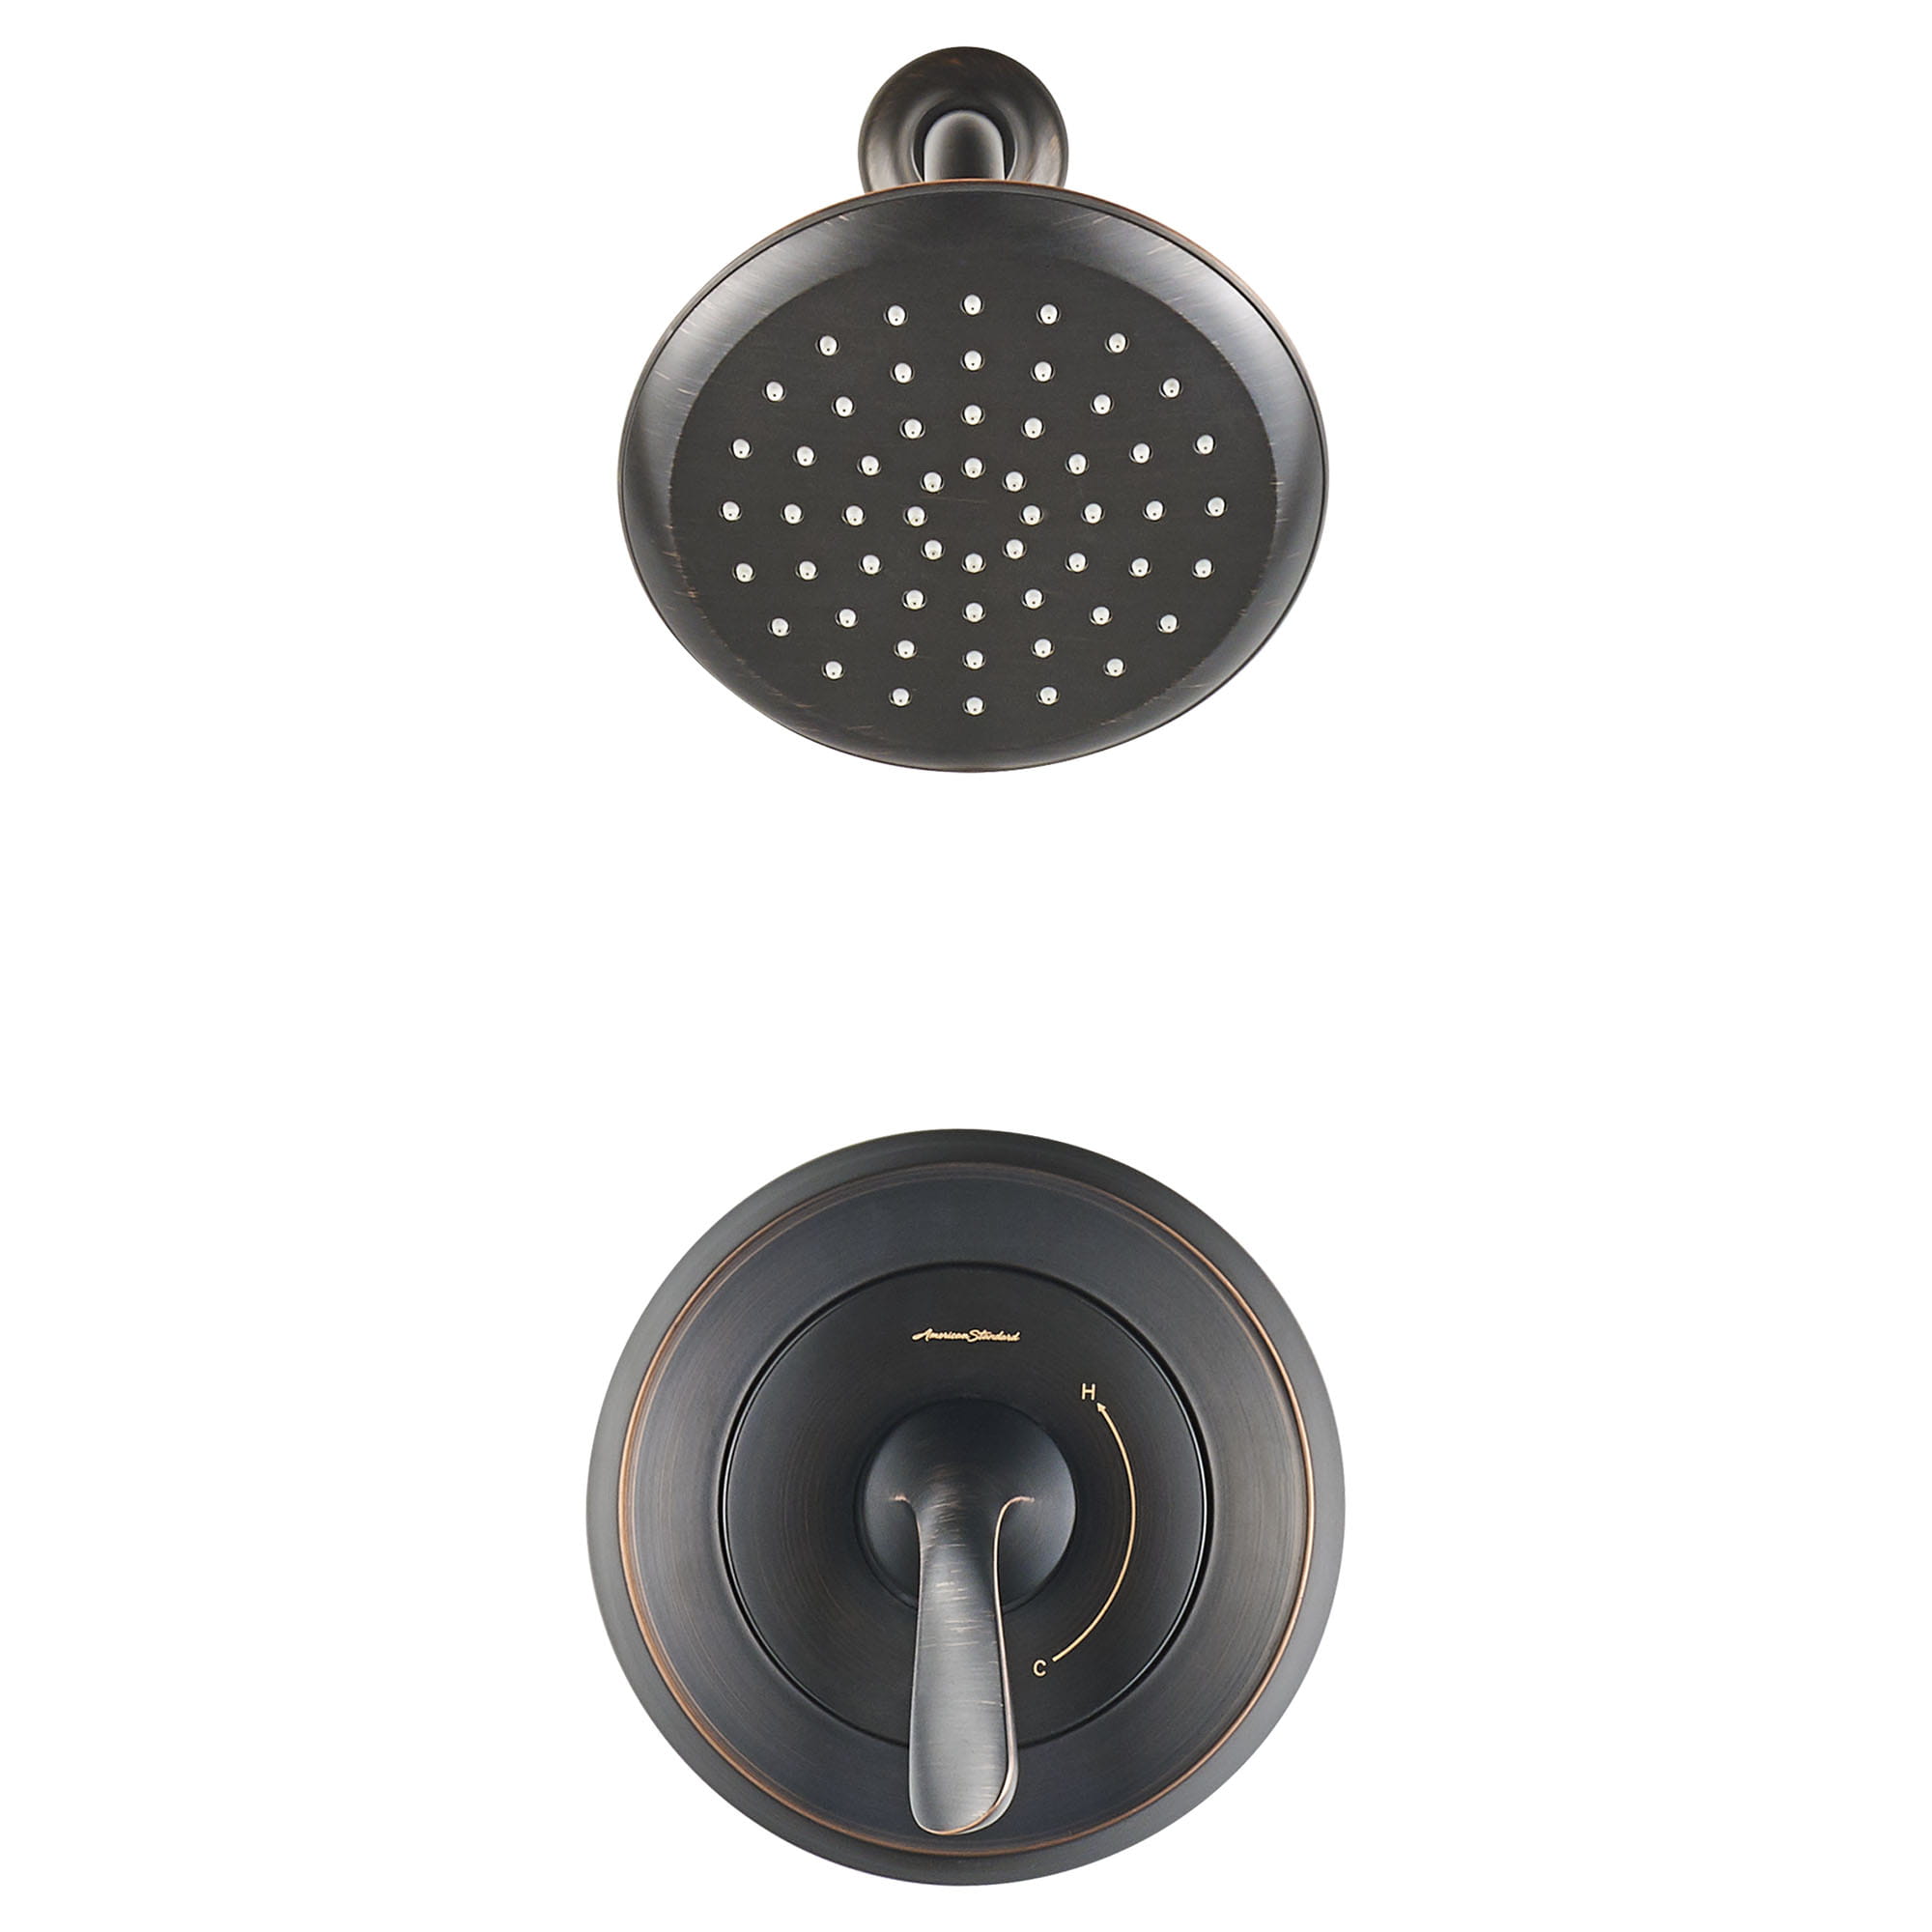 Fluent 25 gpm 95 L min Shower Trim Kit With Double Ceramic Pressure Balance Cartridge With Lever Handle LEGACY BRONZE